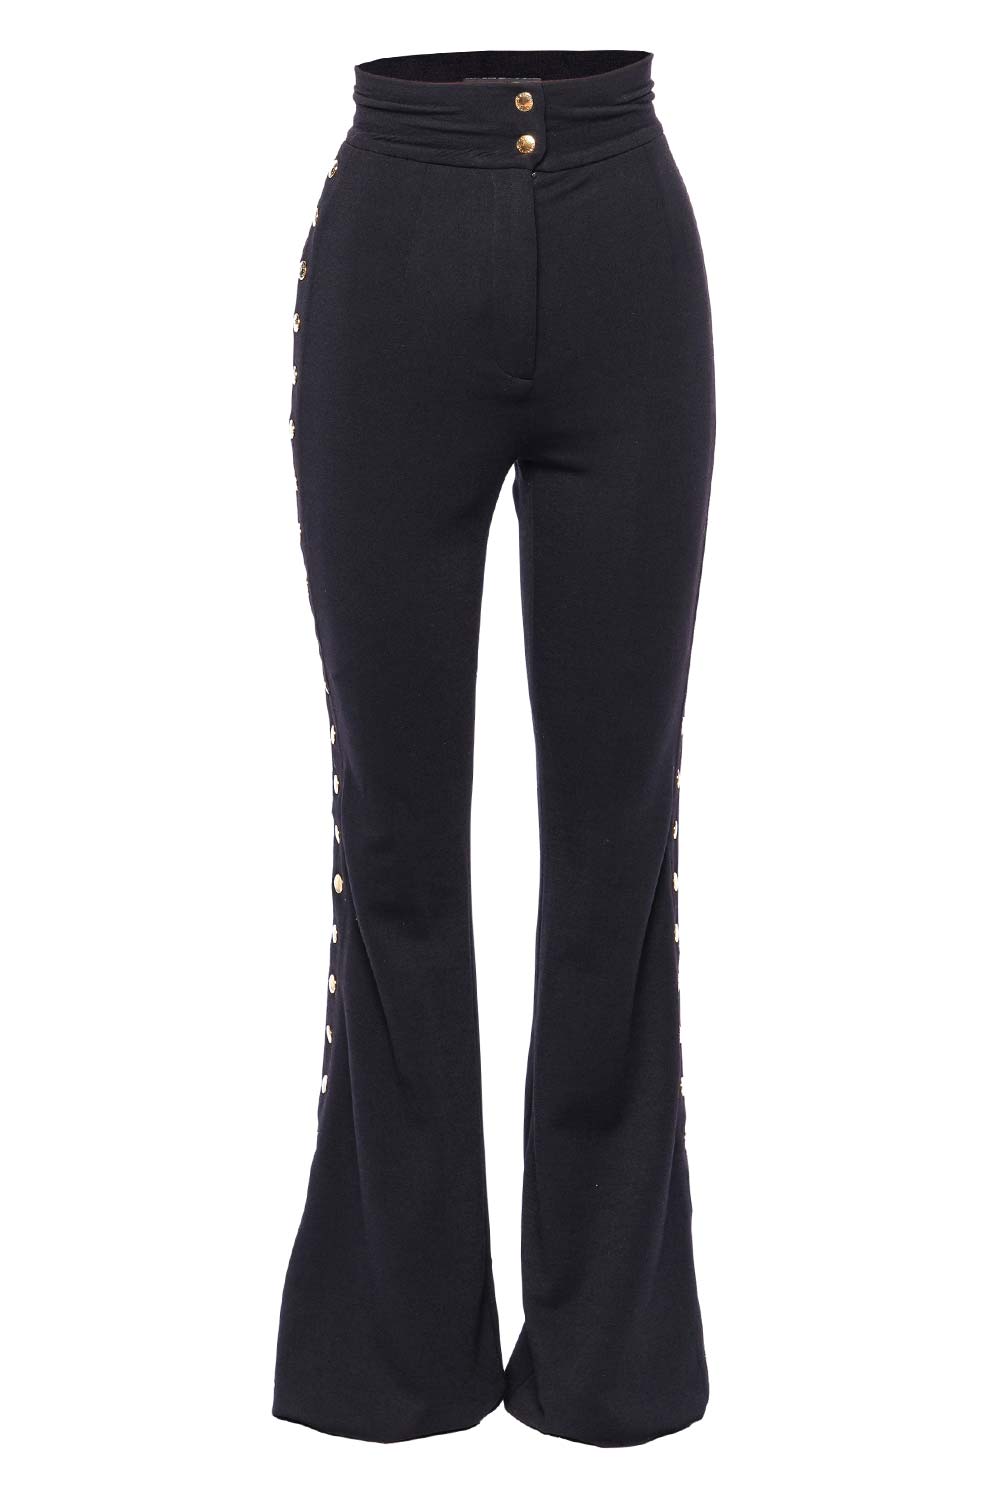 Dolce & Gabbana Black Buttoned Jersey Flared Pants